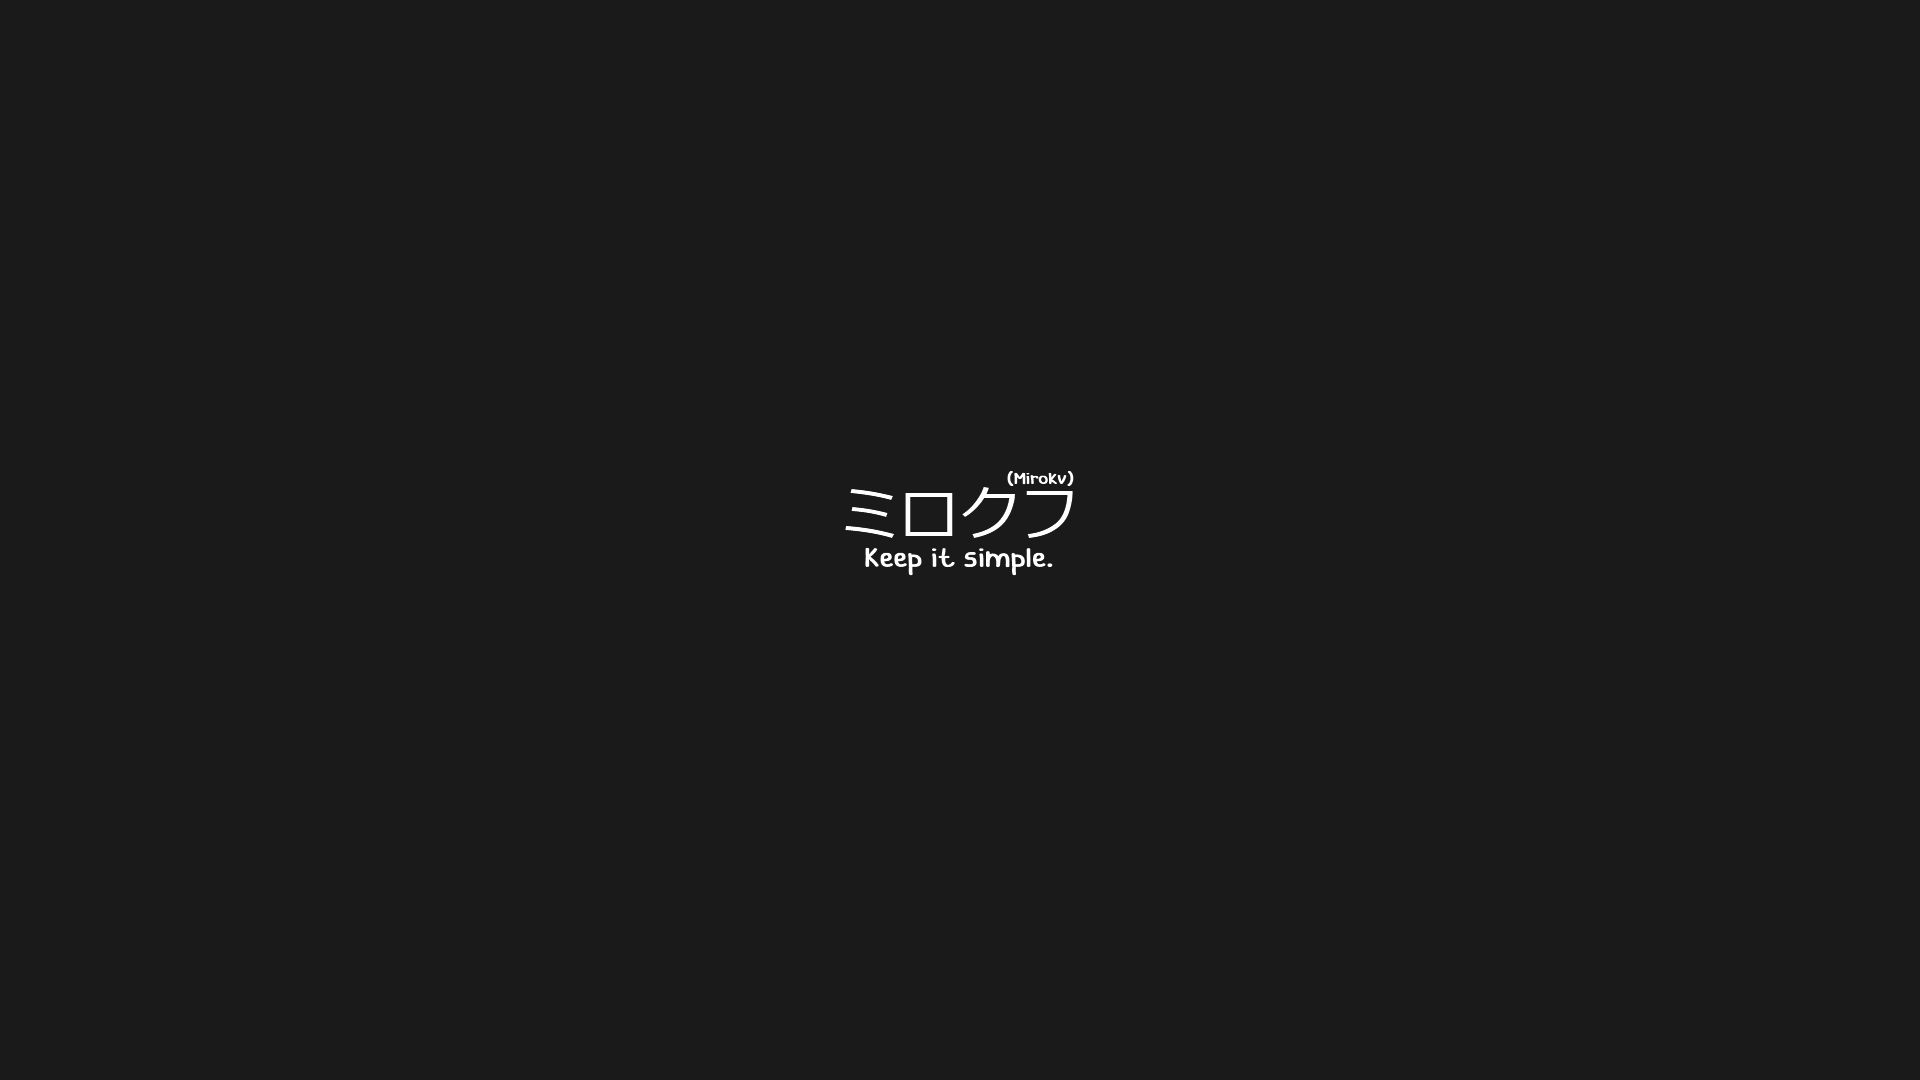 #keep it simple, #black background, #Japanese, #translated, #simple background, wallpaper